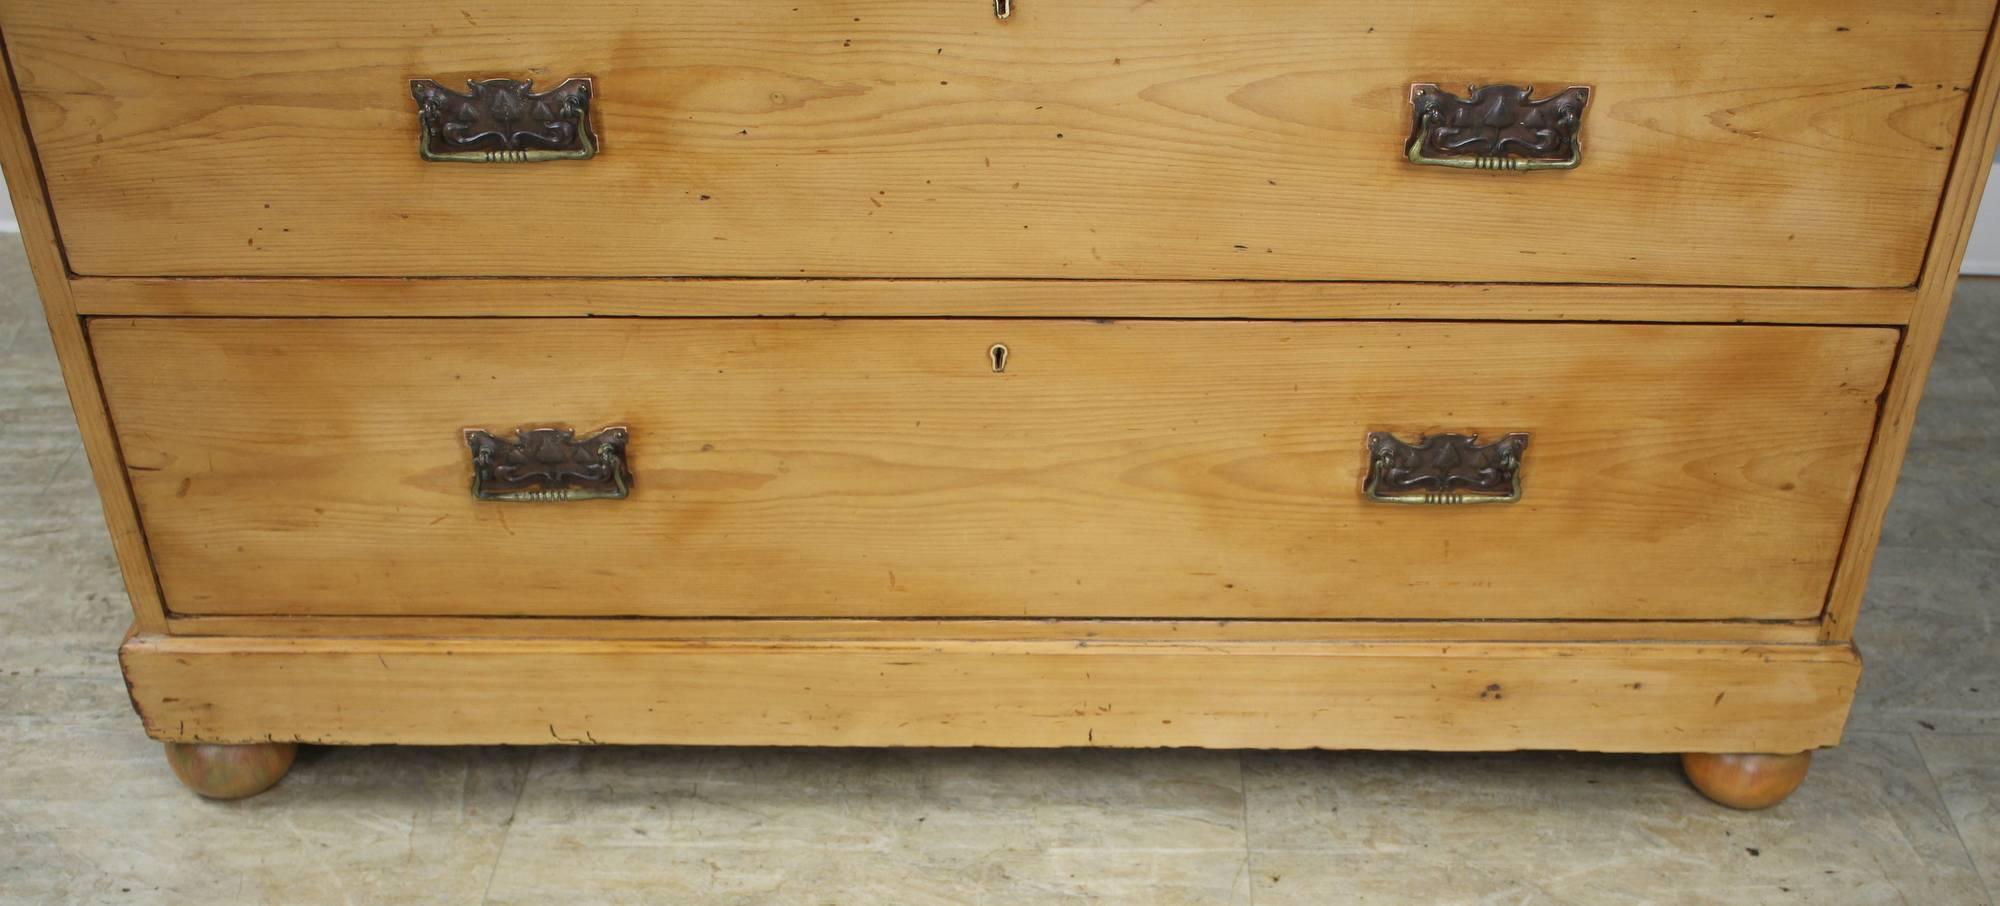 Antique English Pine Chest of Drawers with Decorative Pulls 4